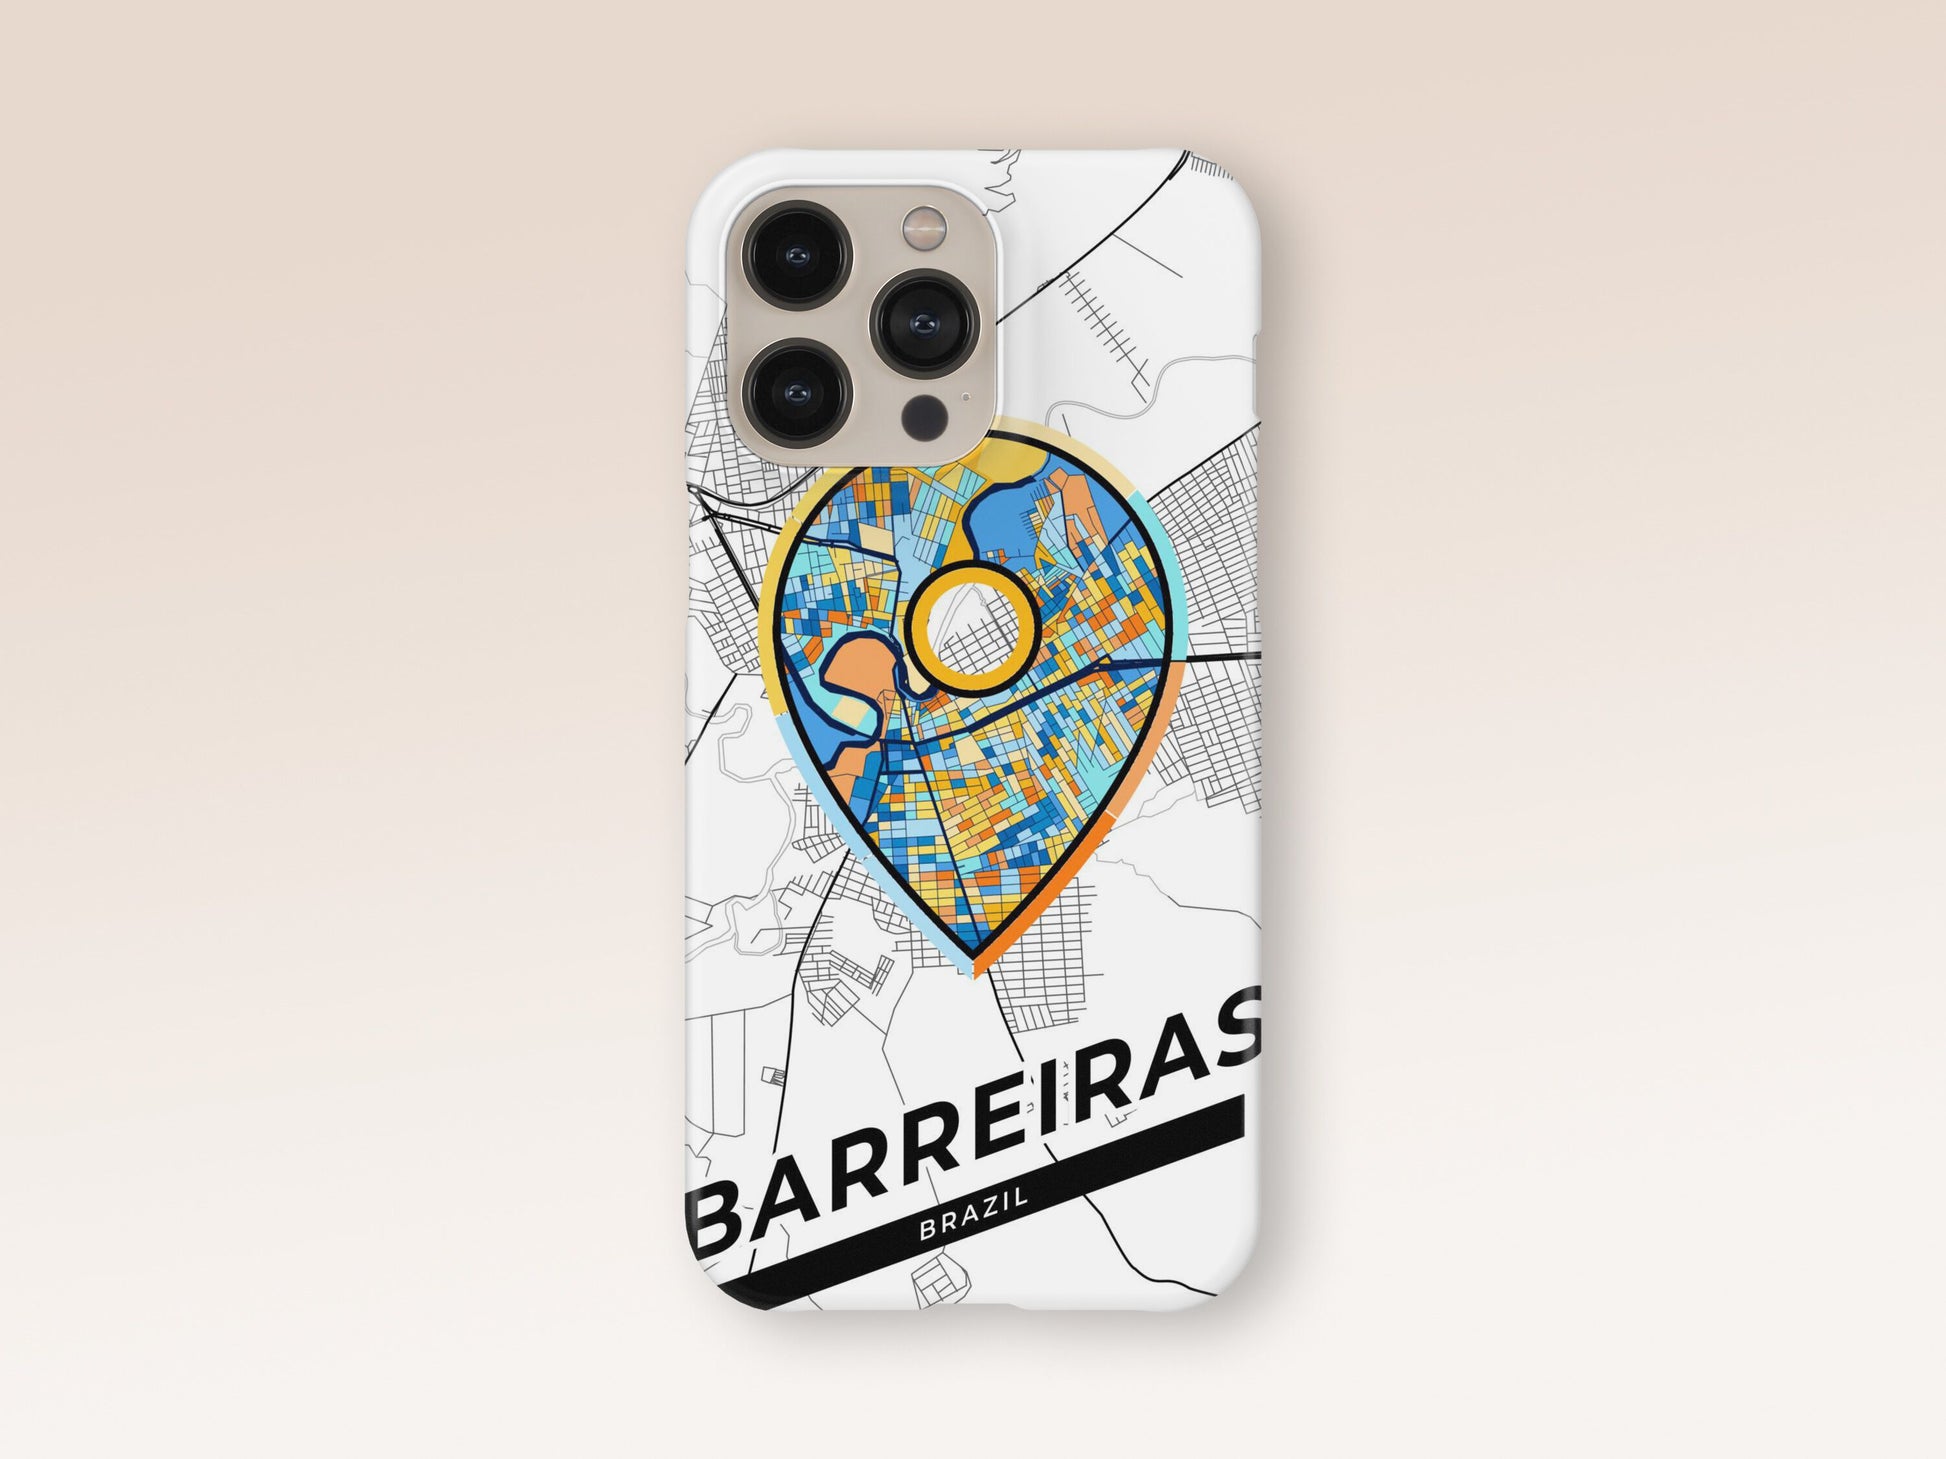 Barreiras Brazil slim phone case with colorful icon. Birthday, wedding or housewarming gift. Couple match cases. 1